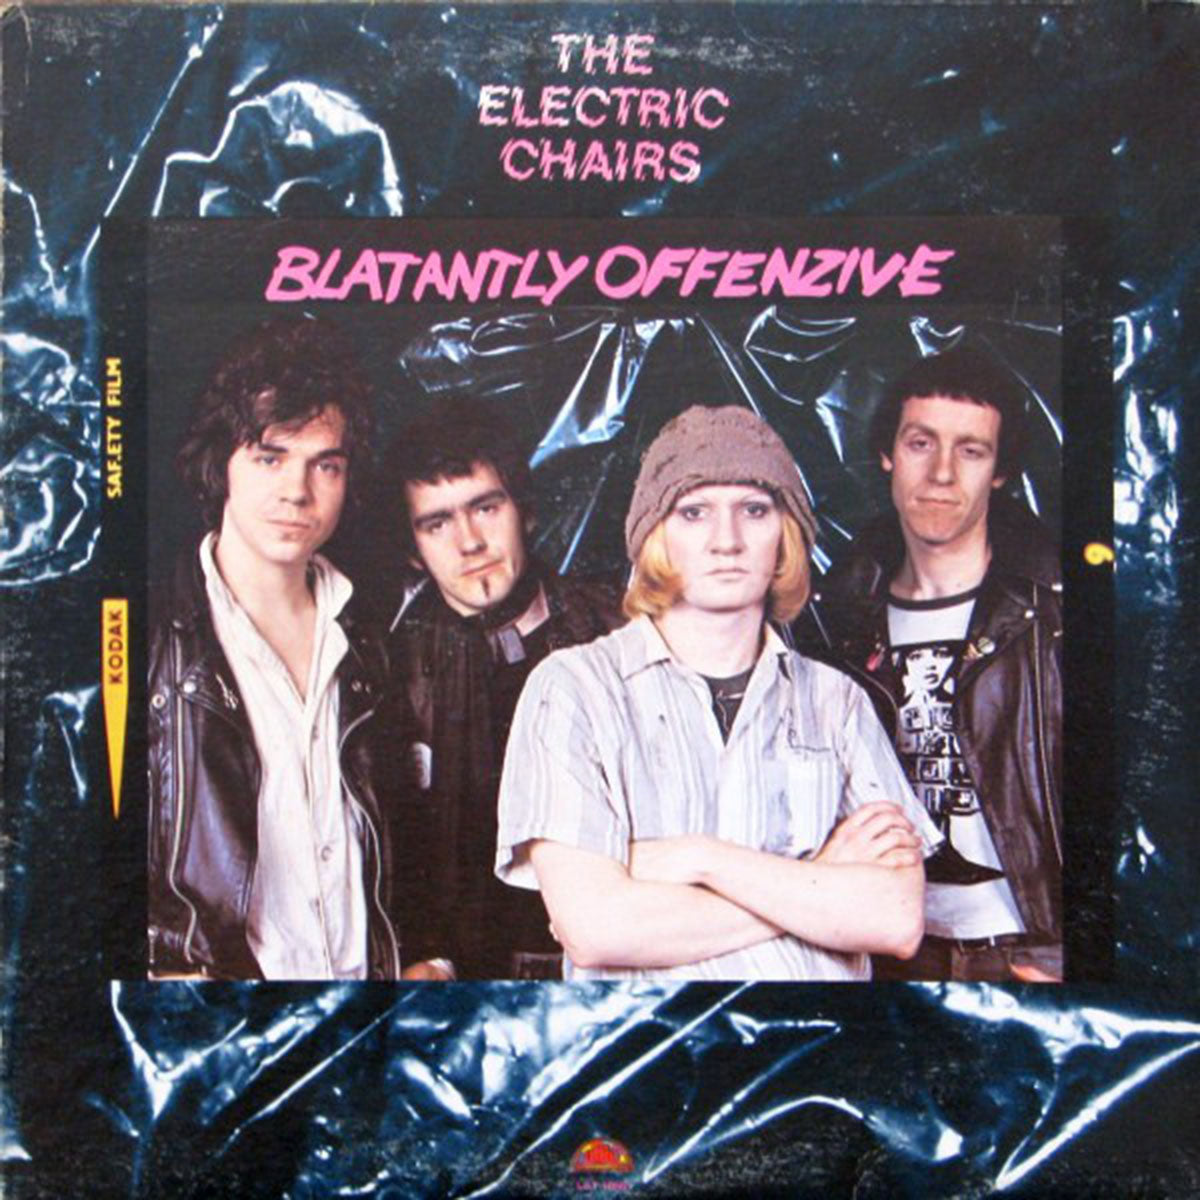 The Electric Chairs – Blatantly Offenzive -  1978